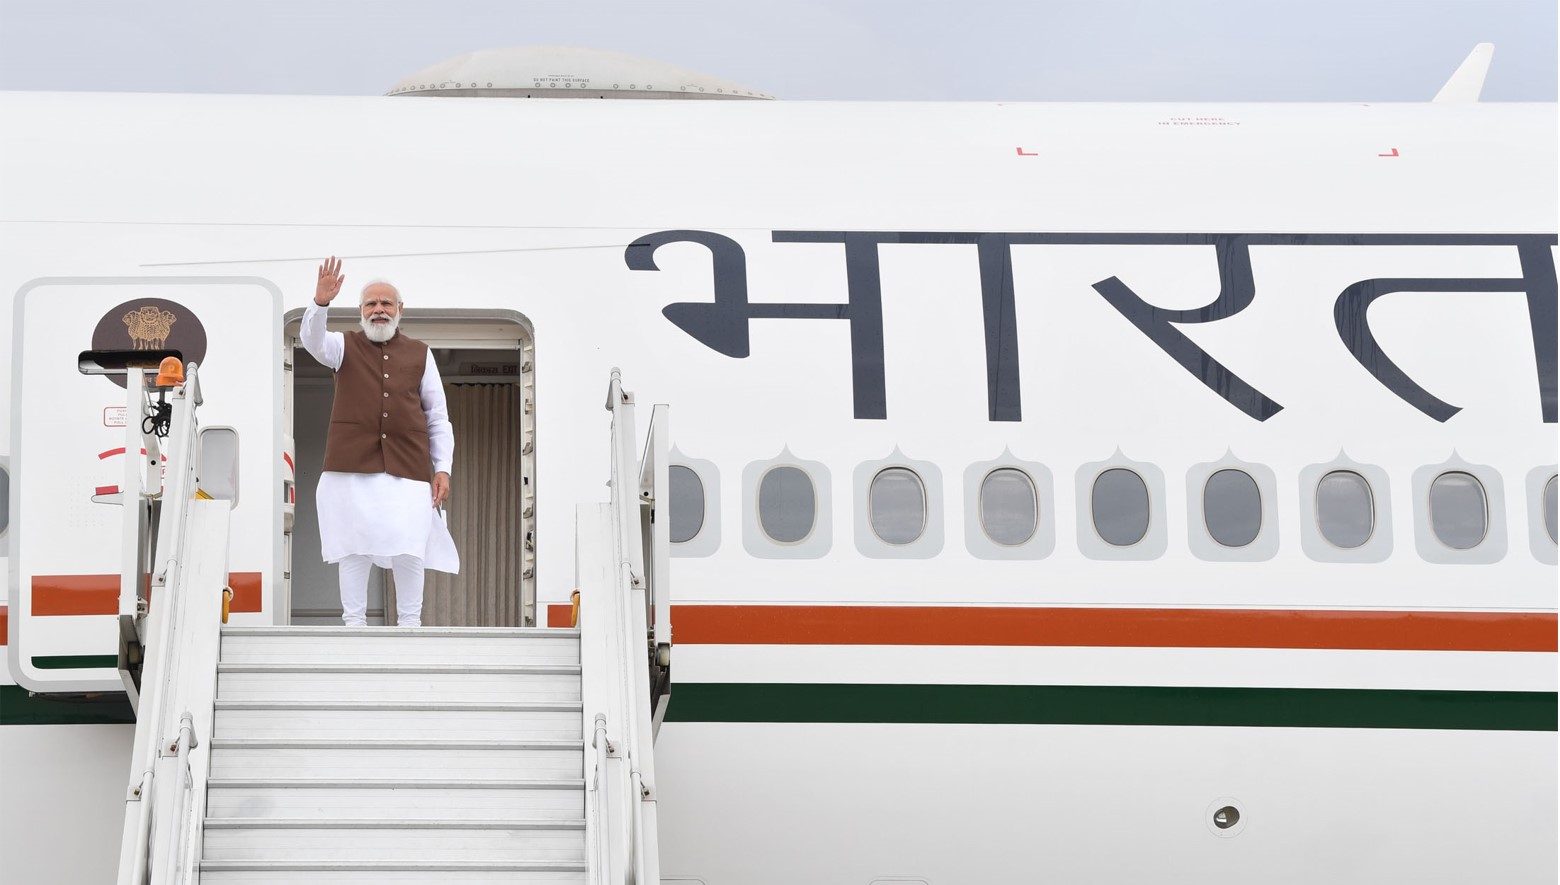 25 engagements, including meeting with 8 world leaders, in PM Modi’s trip: Govt sources